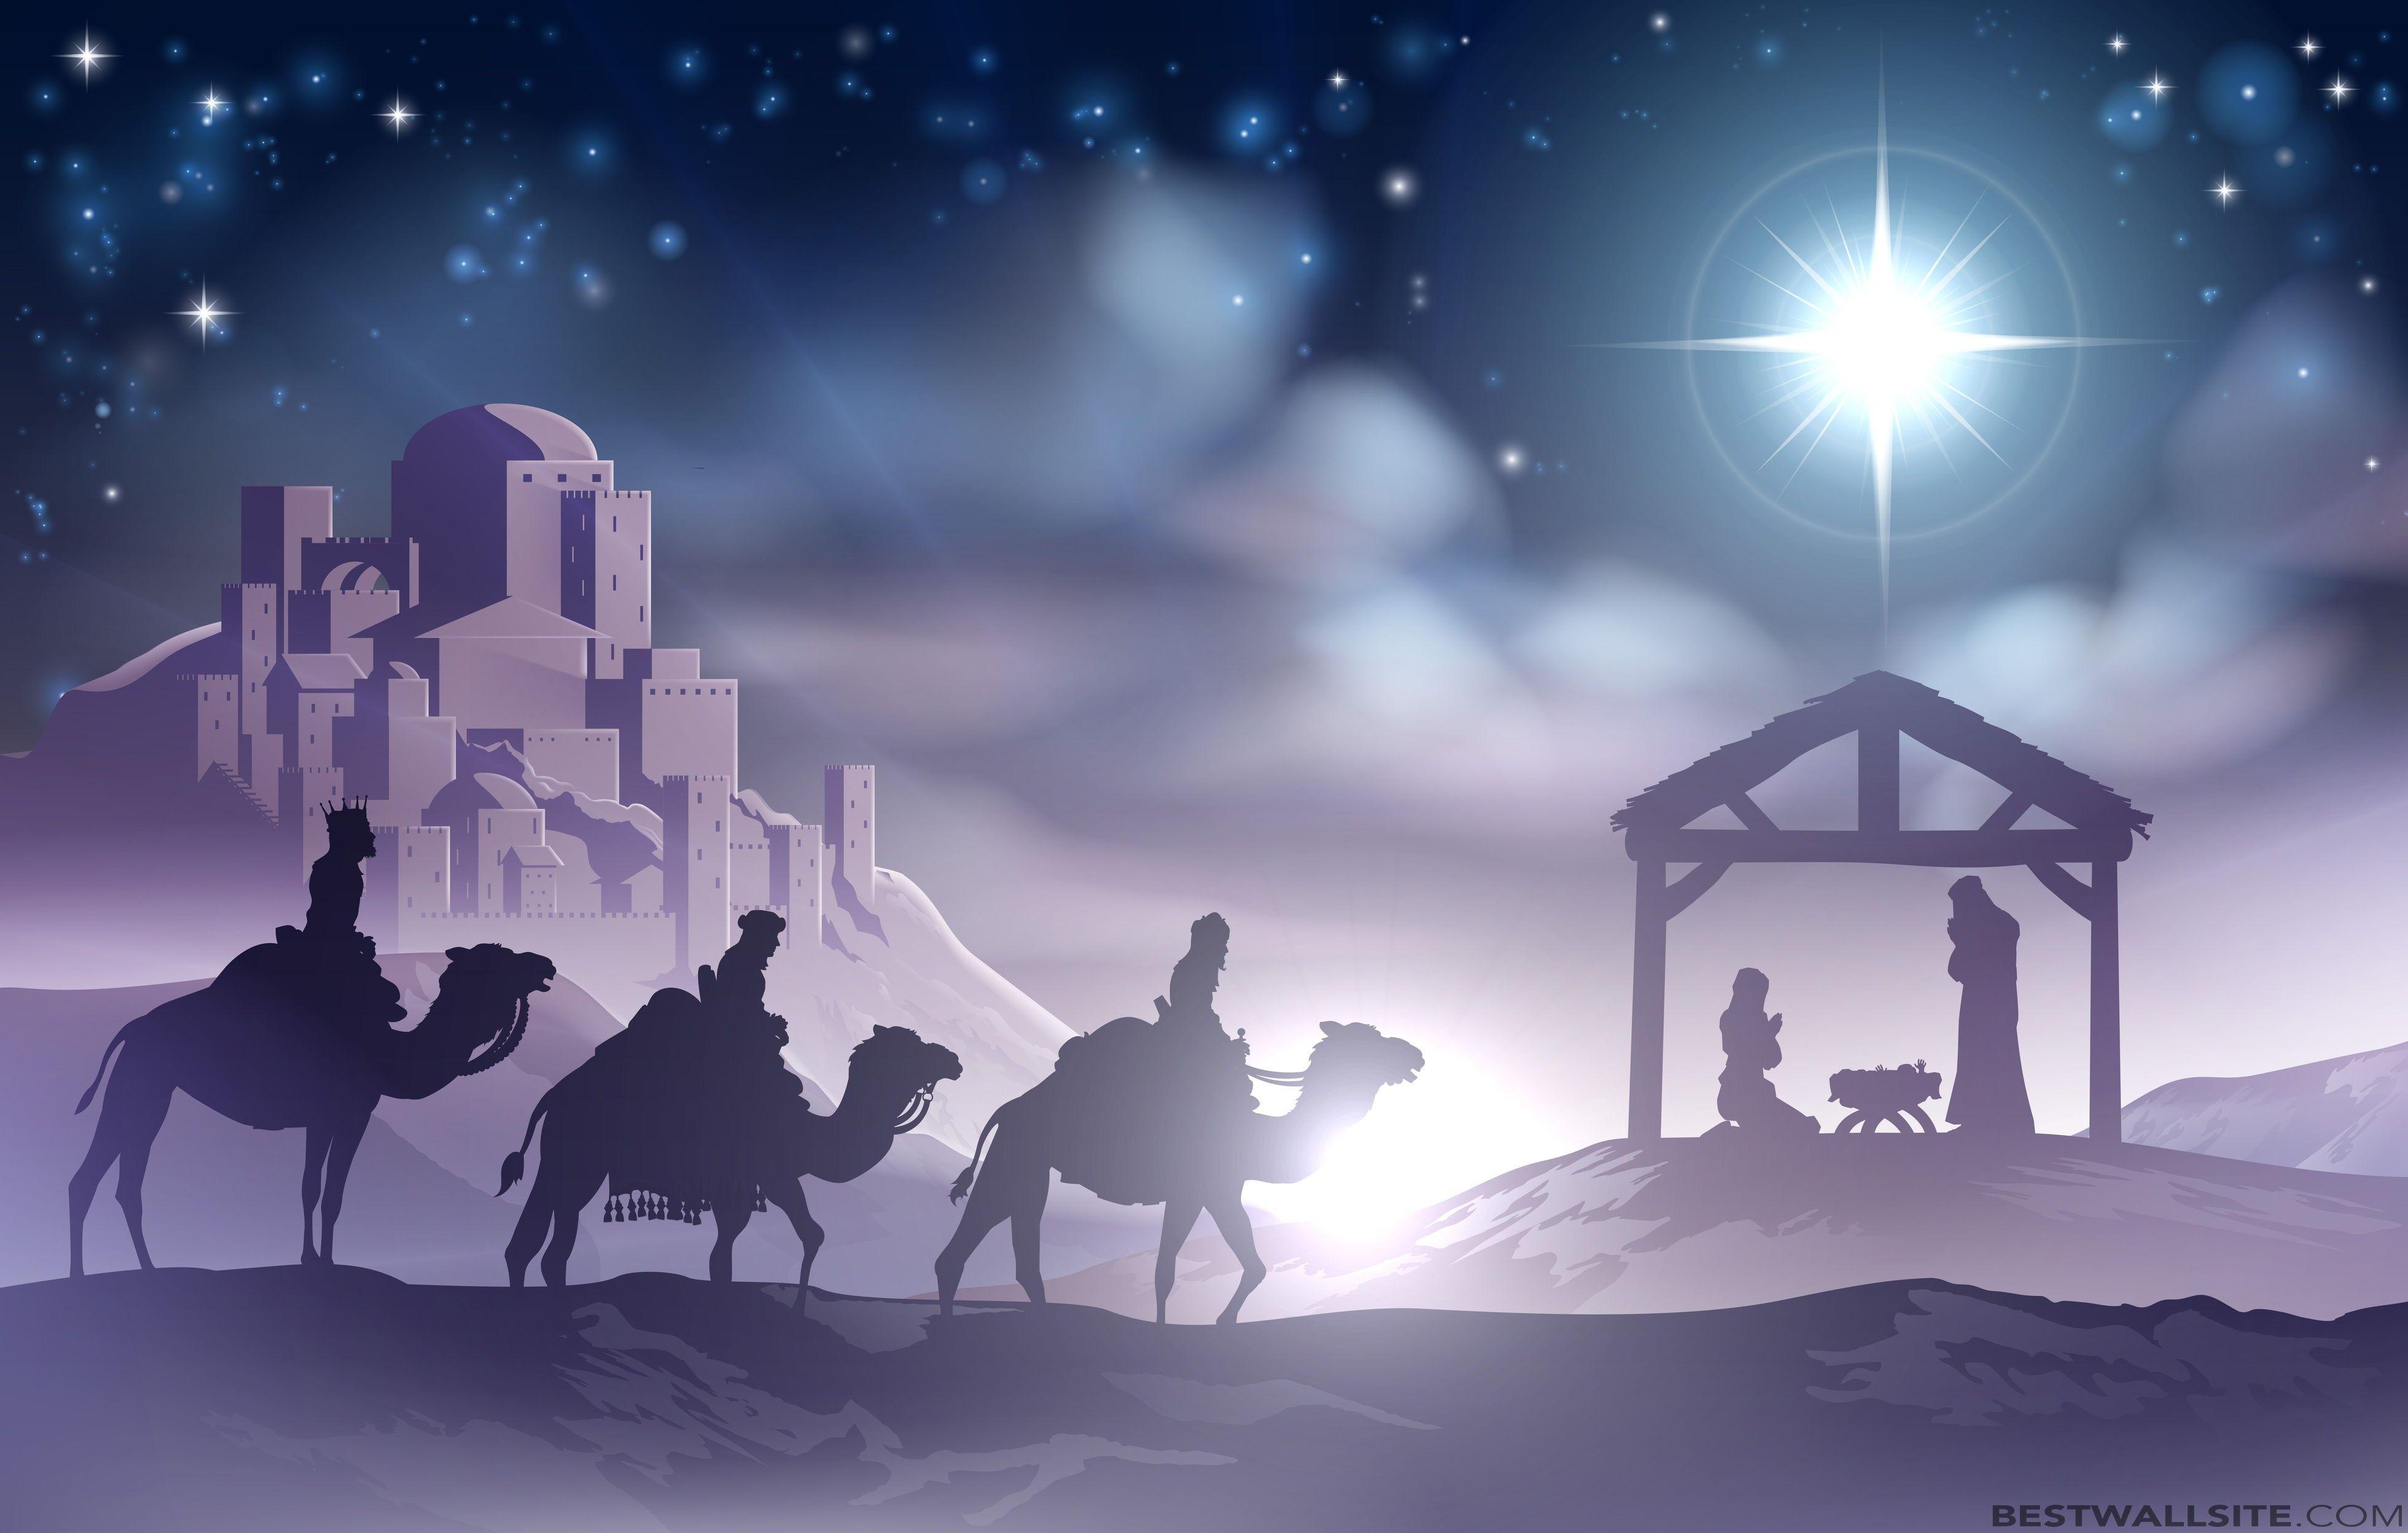 Free Christmas Nativity Wallpapers  Wallpaper Cave